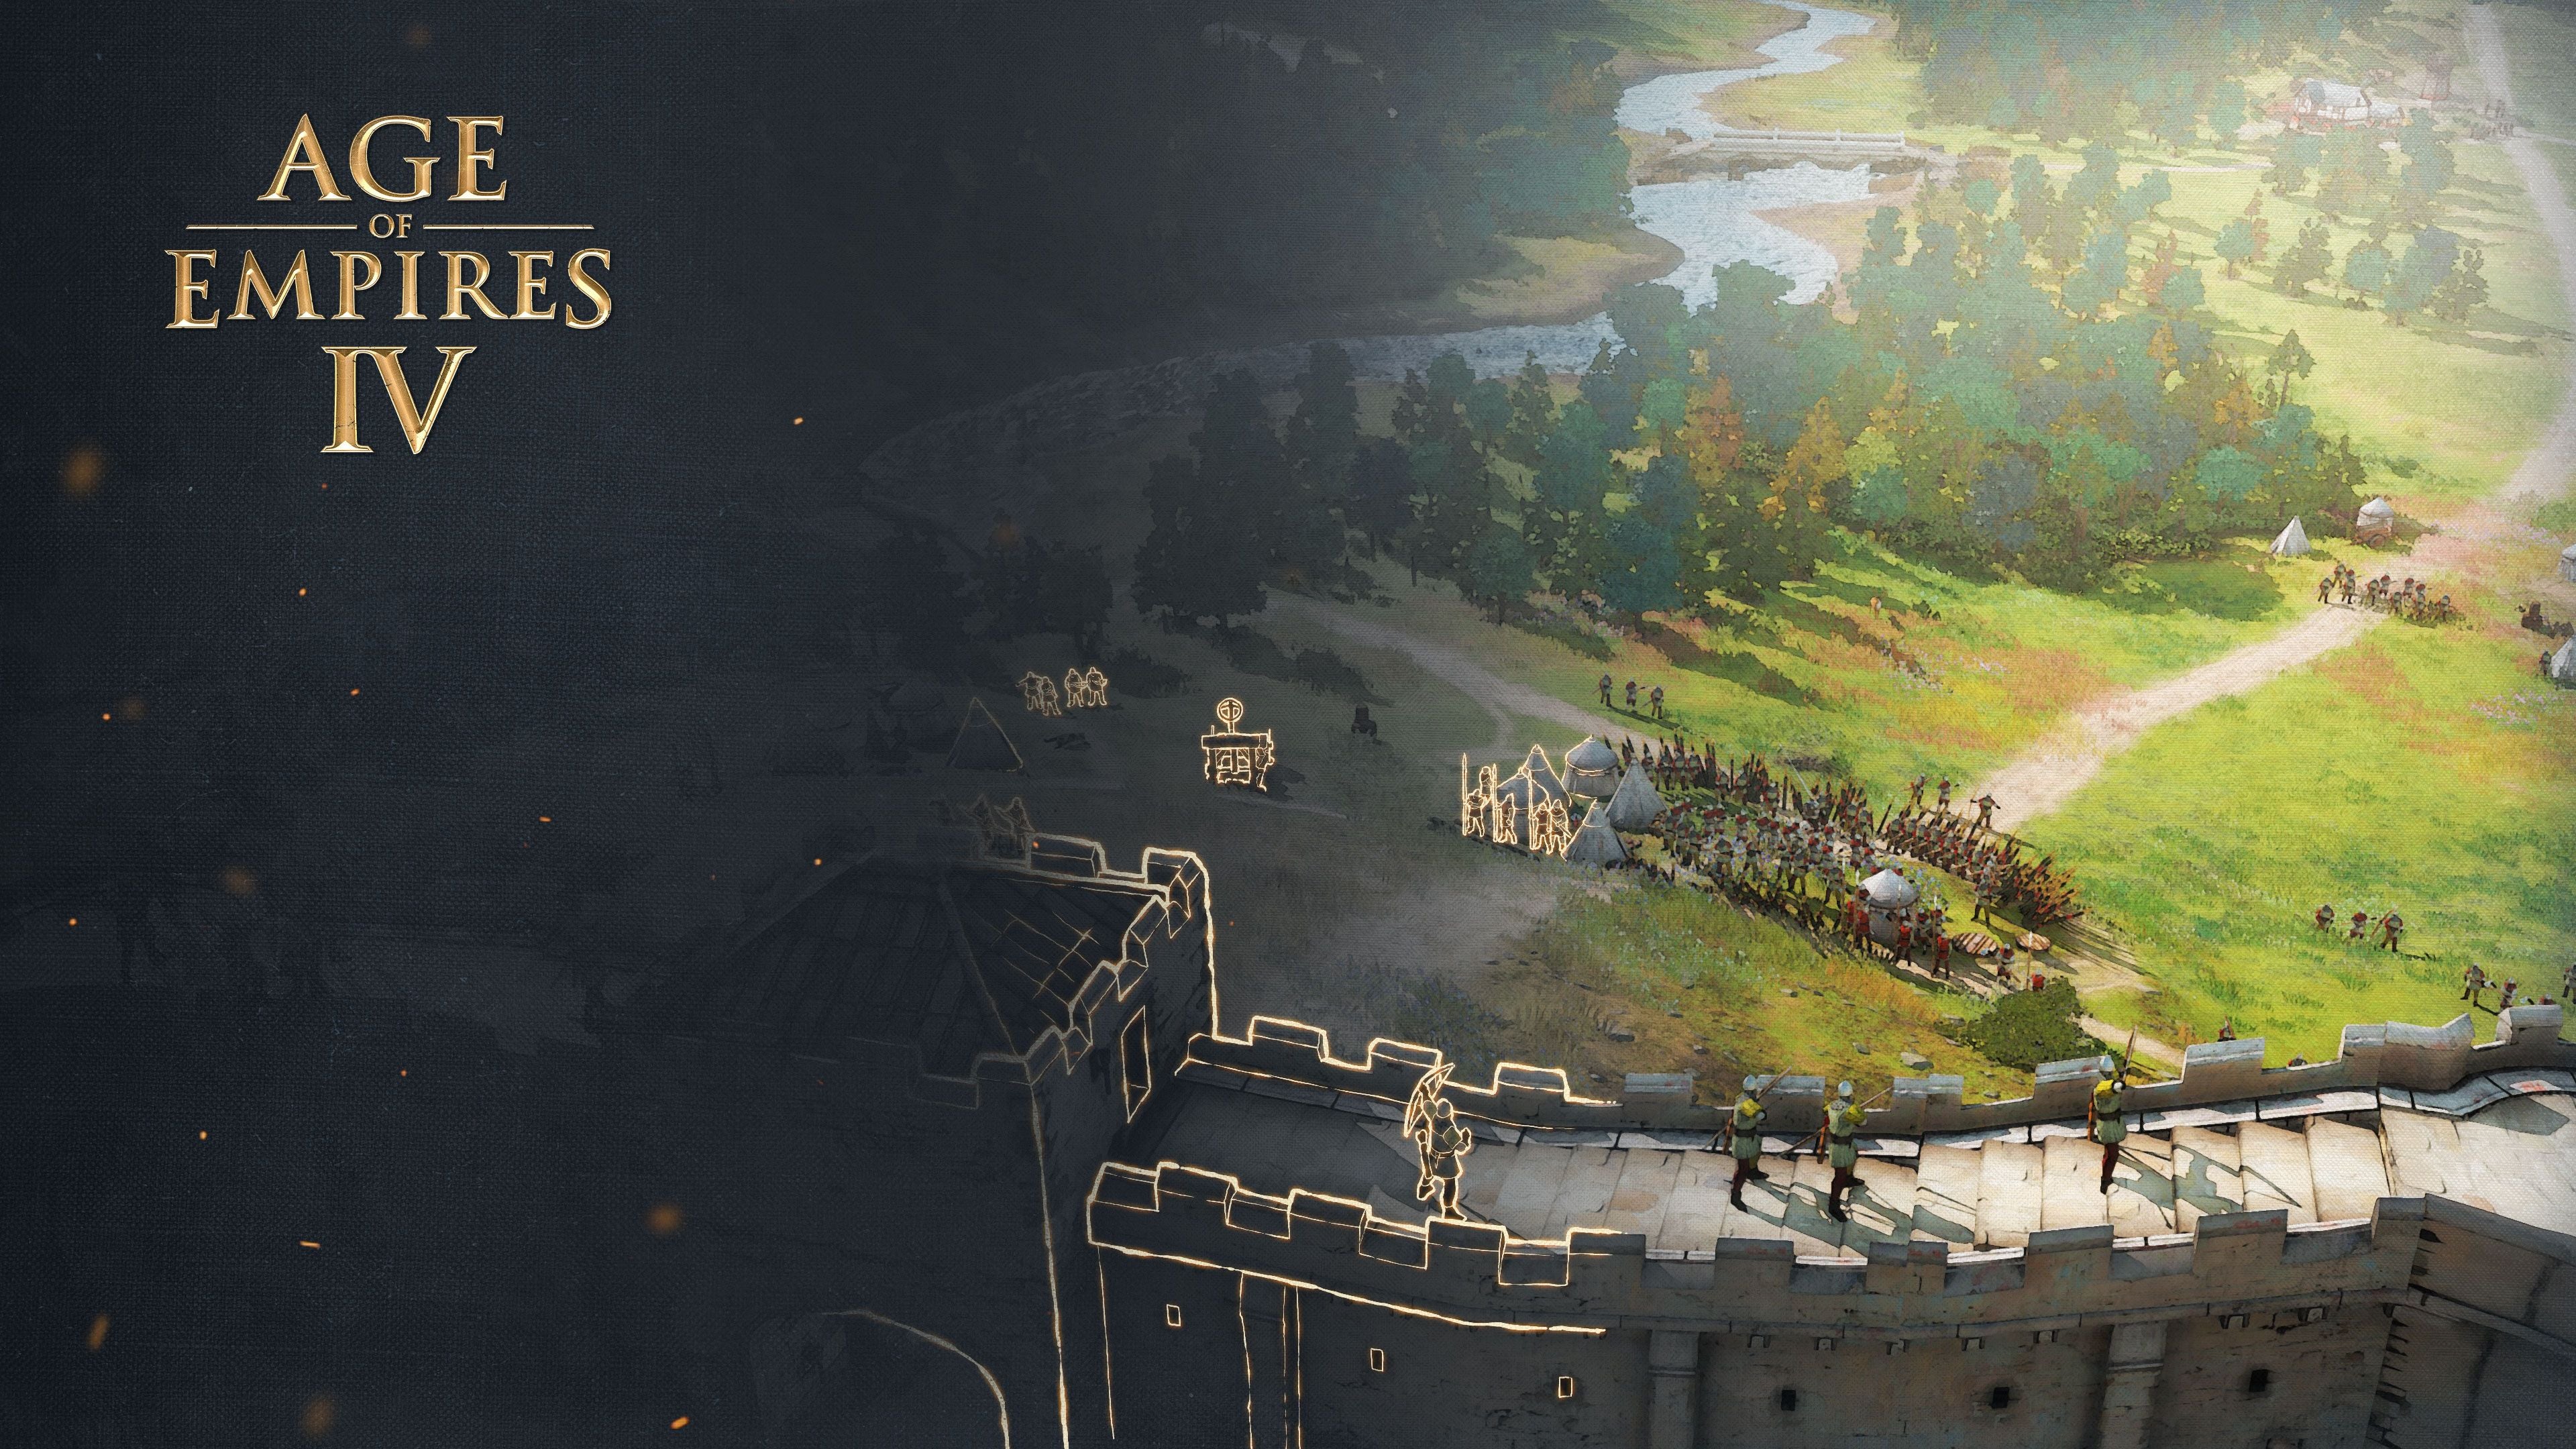 Age of Empires IV Wallpapers: ageofempires.